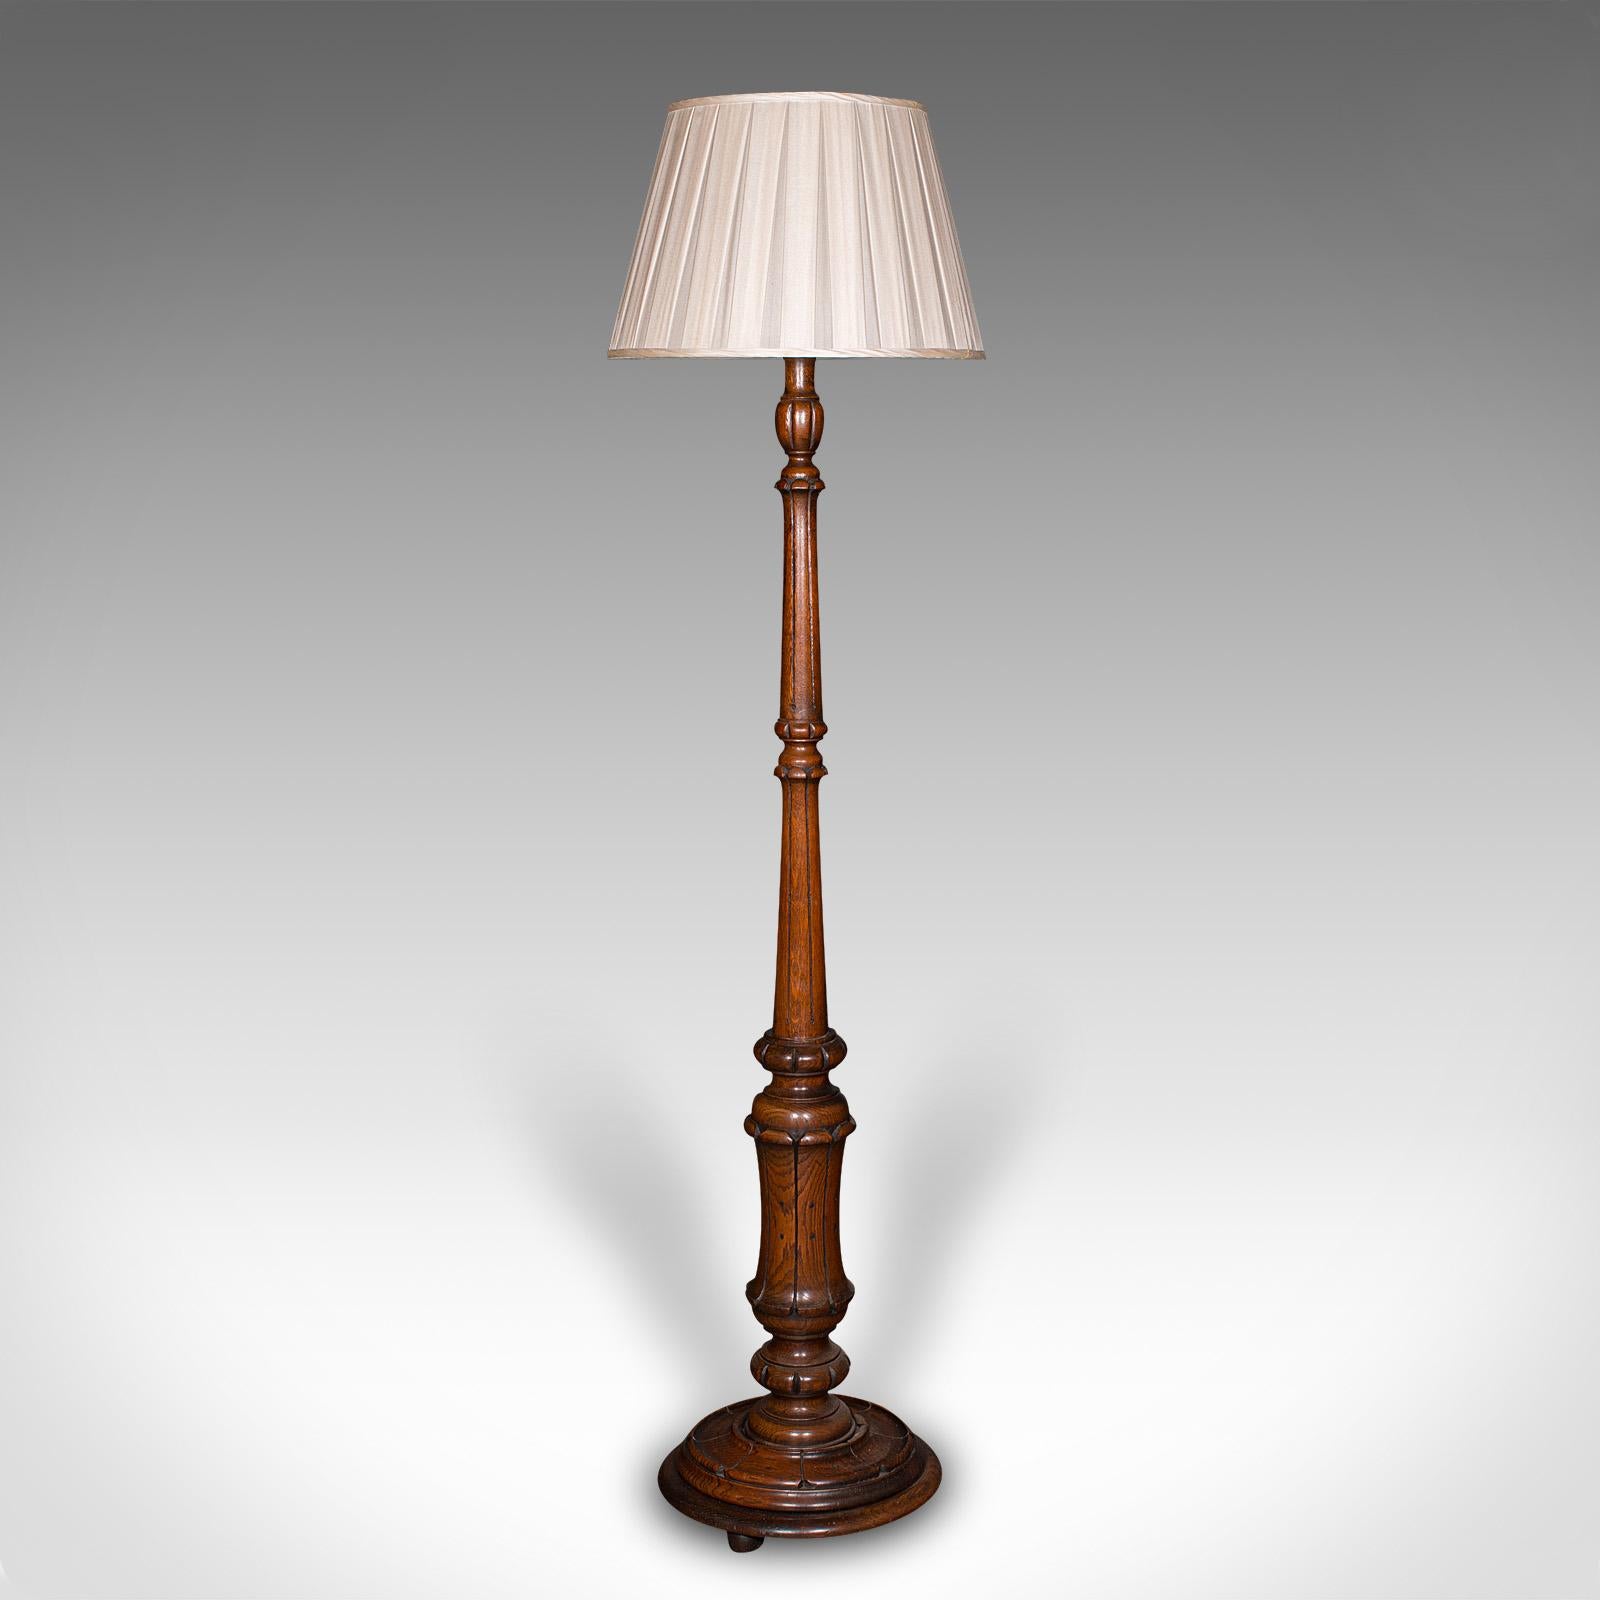 This is an antique standard lamp. A Scottish, oak library or lounge reading light, dating to the late Victorian period, circa 1890.

Delightfully carved lamp base, with timeless appeal
Displays a desirable aged patina and in good order
Select oak